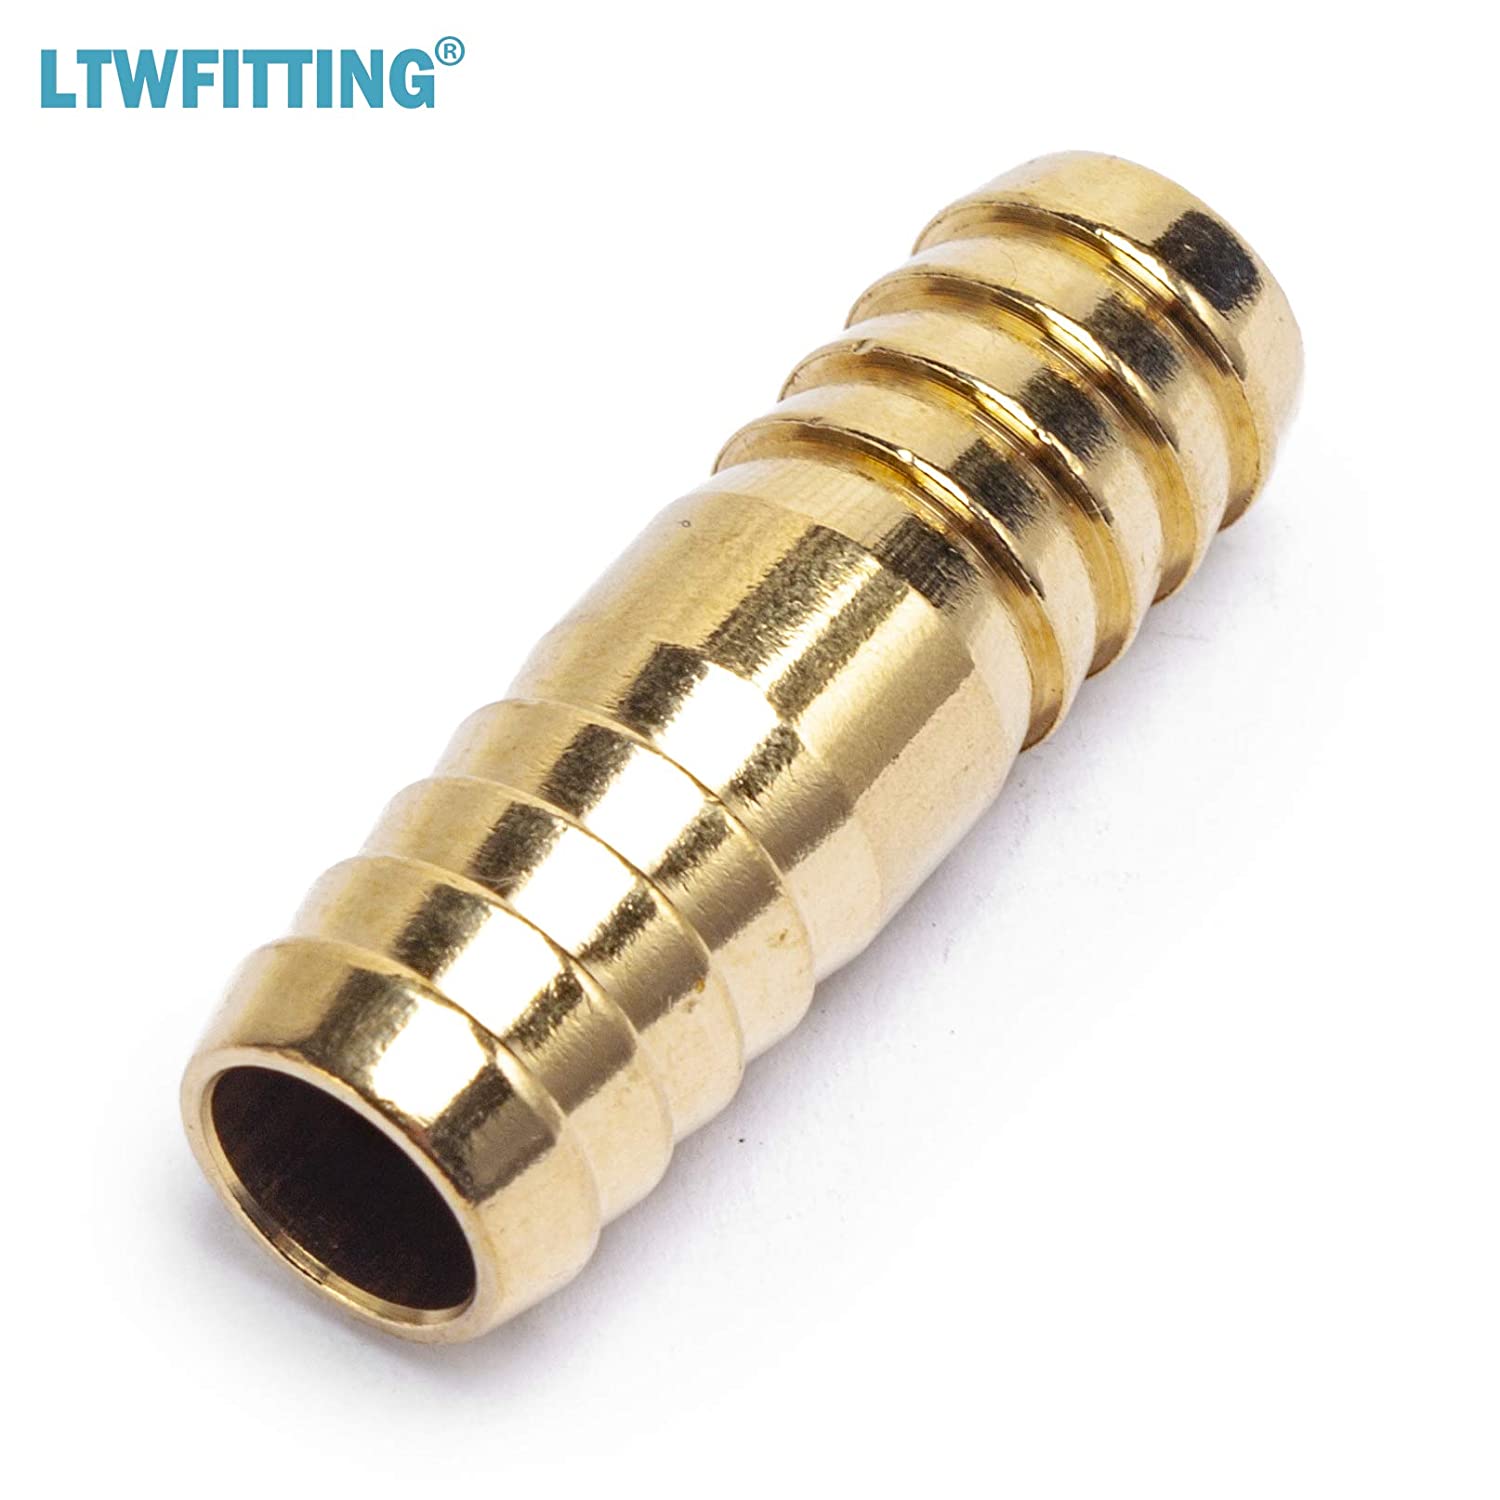 LTWFITTING Brass Barb Splicer Mender 1/2-Inch ID Hose Fitting Air Water Fuel Hose Joiner(Pack of 5)